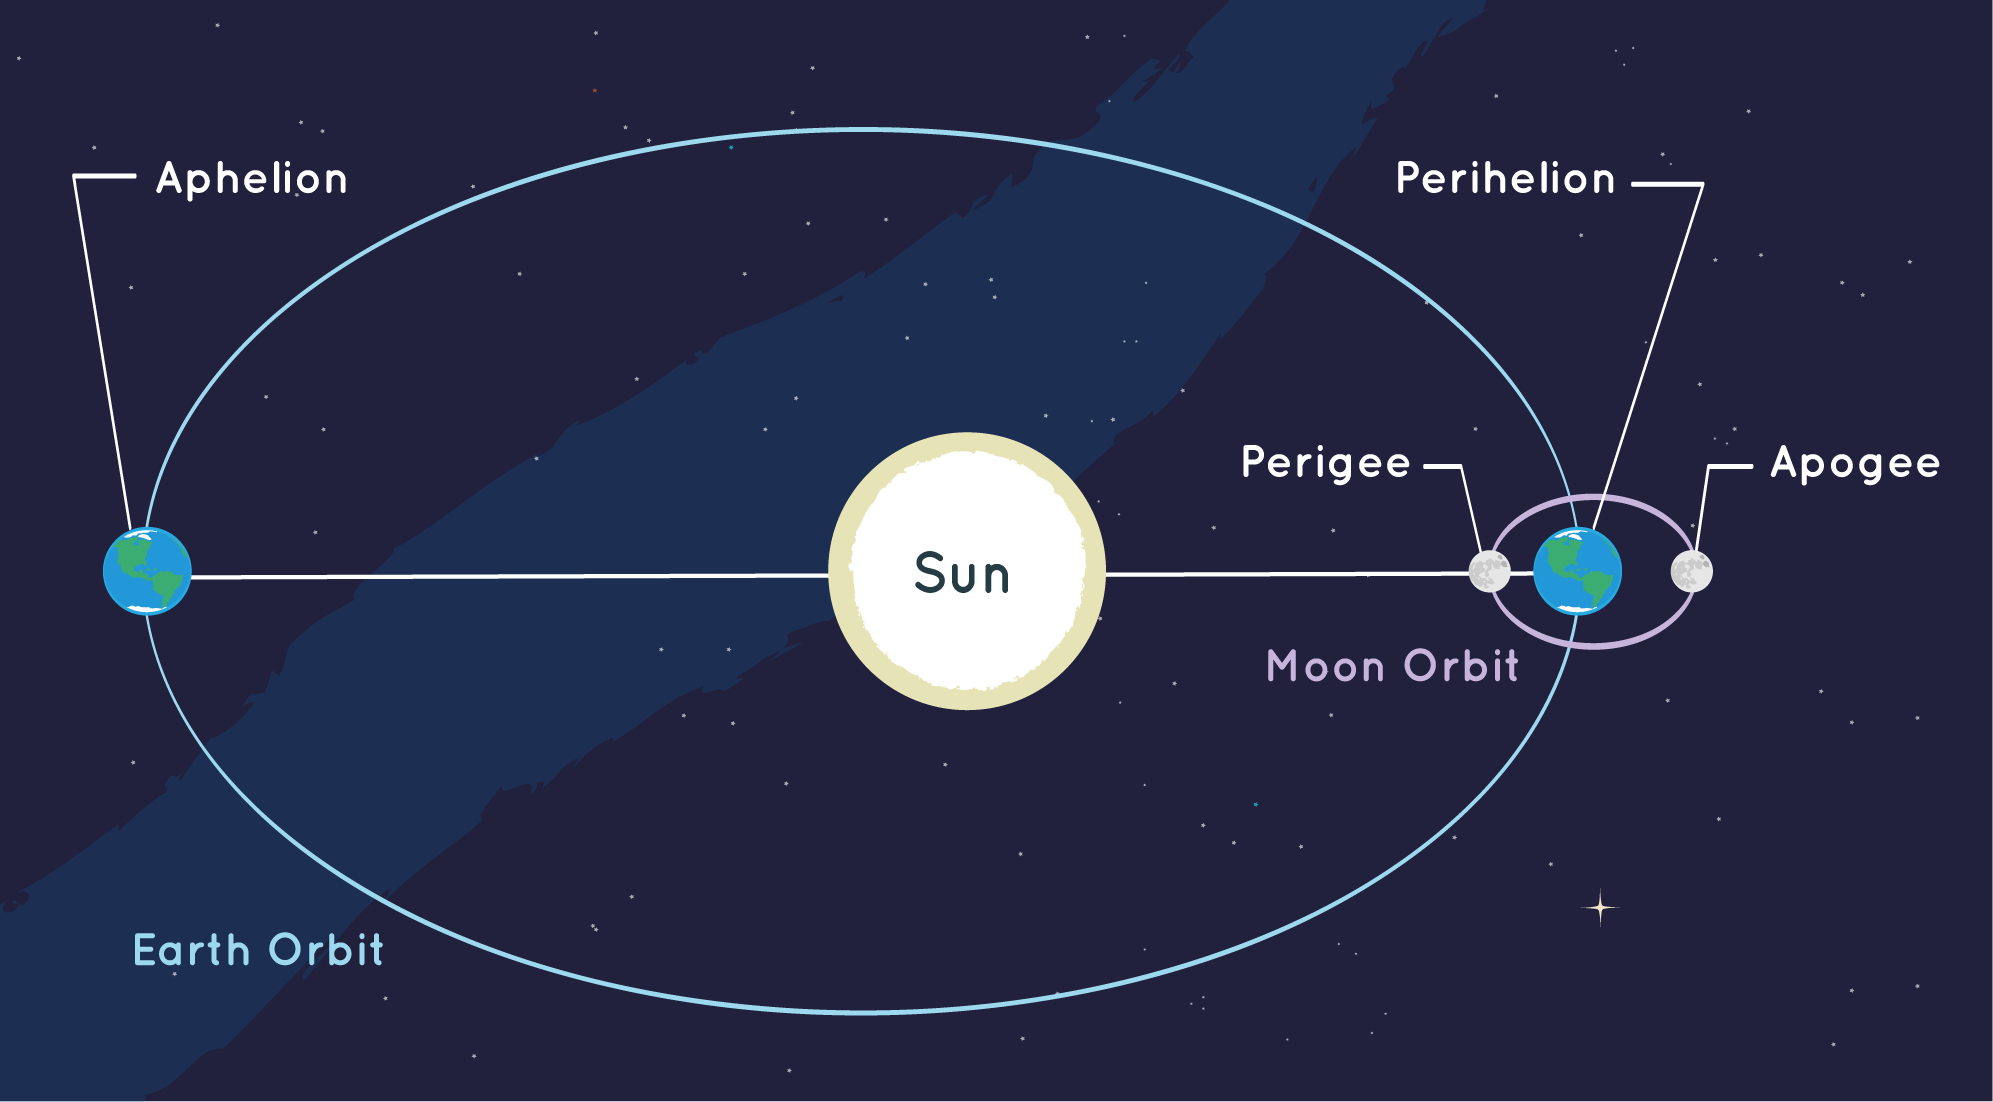 An illustration of Earth’s orbit around the Sun, and the Moon’s orbit around Earth. The aphelion, perihelion, perigee, and apogee points are labeled.